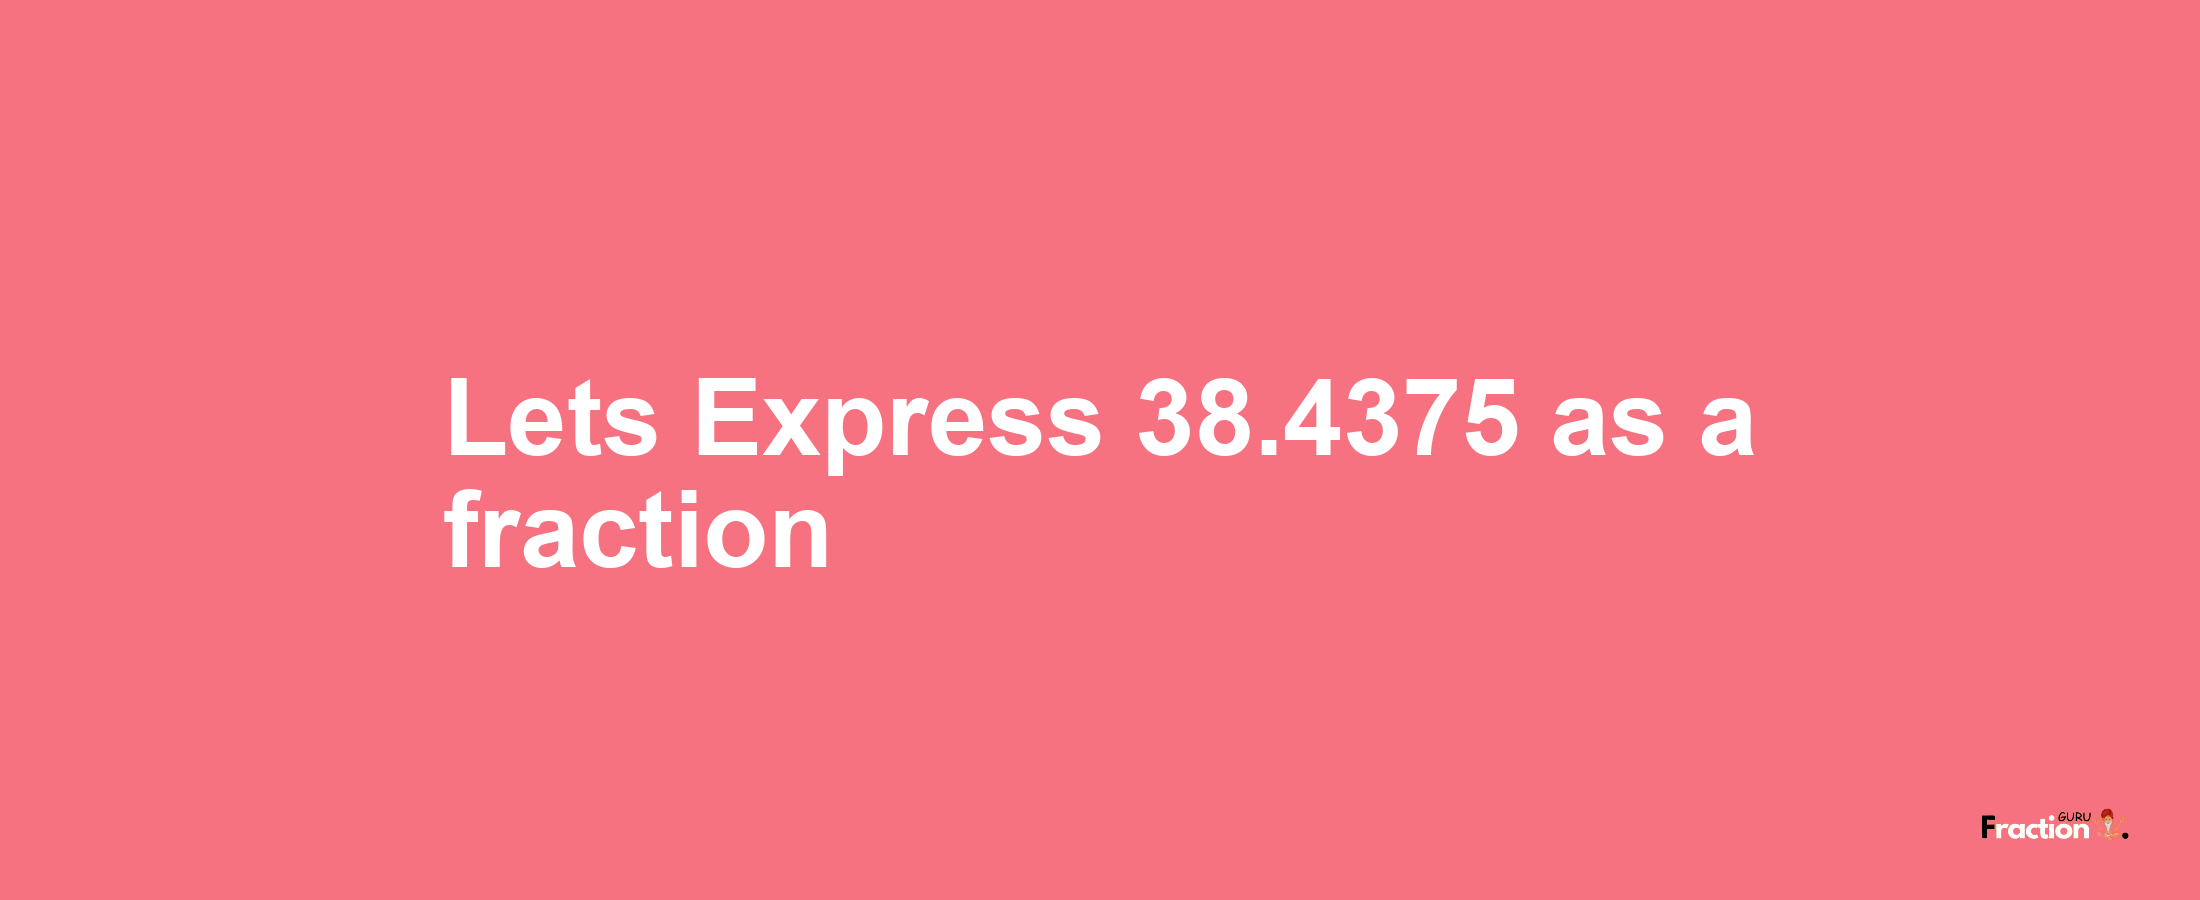 Lets Express 38.4375 as afraction